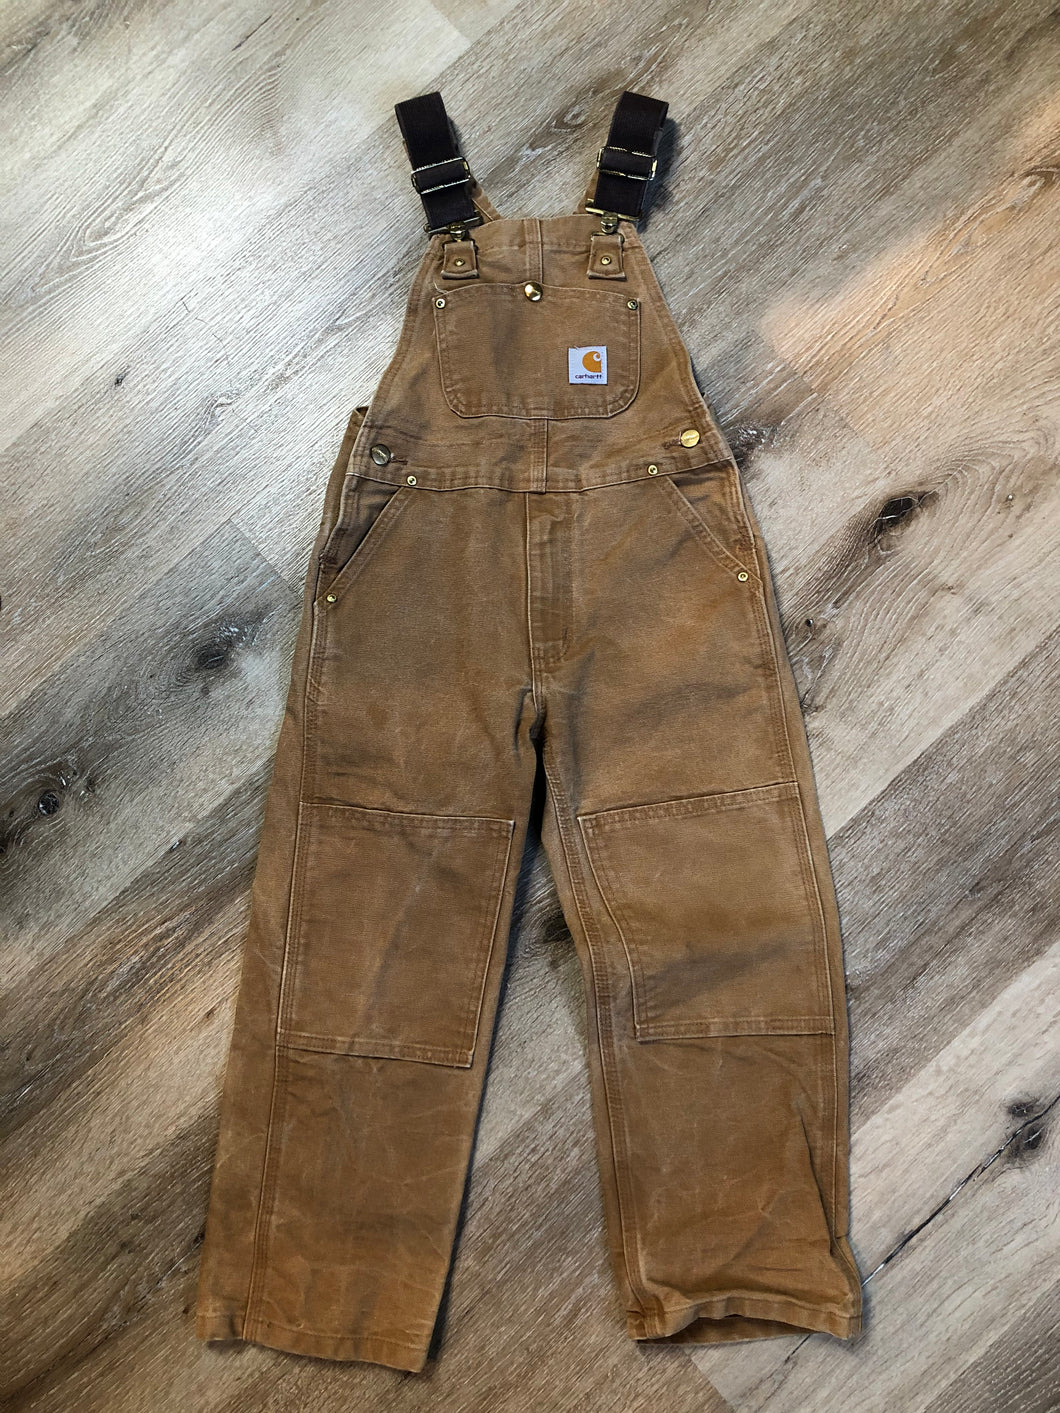 Kingspier Vintage - Kids Carhartt Sleeveless cotton canvas overalls in tan brown with Carhartt logo. Overalls feature adjustable shoulder straps with buckle fastening, patch pocket in the chest and pockets in the front and back, overalls button at the waist and have reinforced knees. Size childs medium.